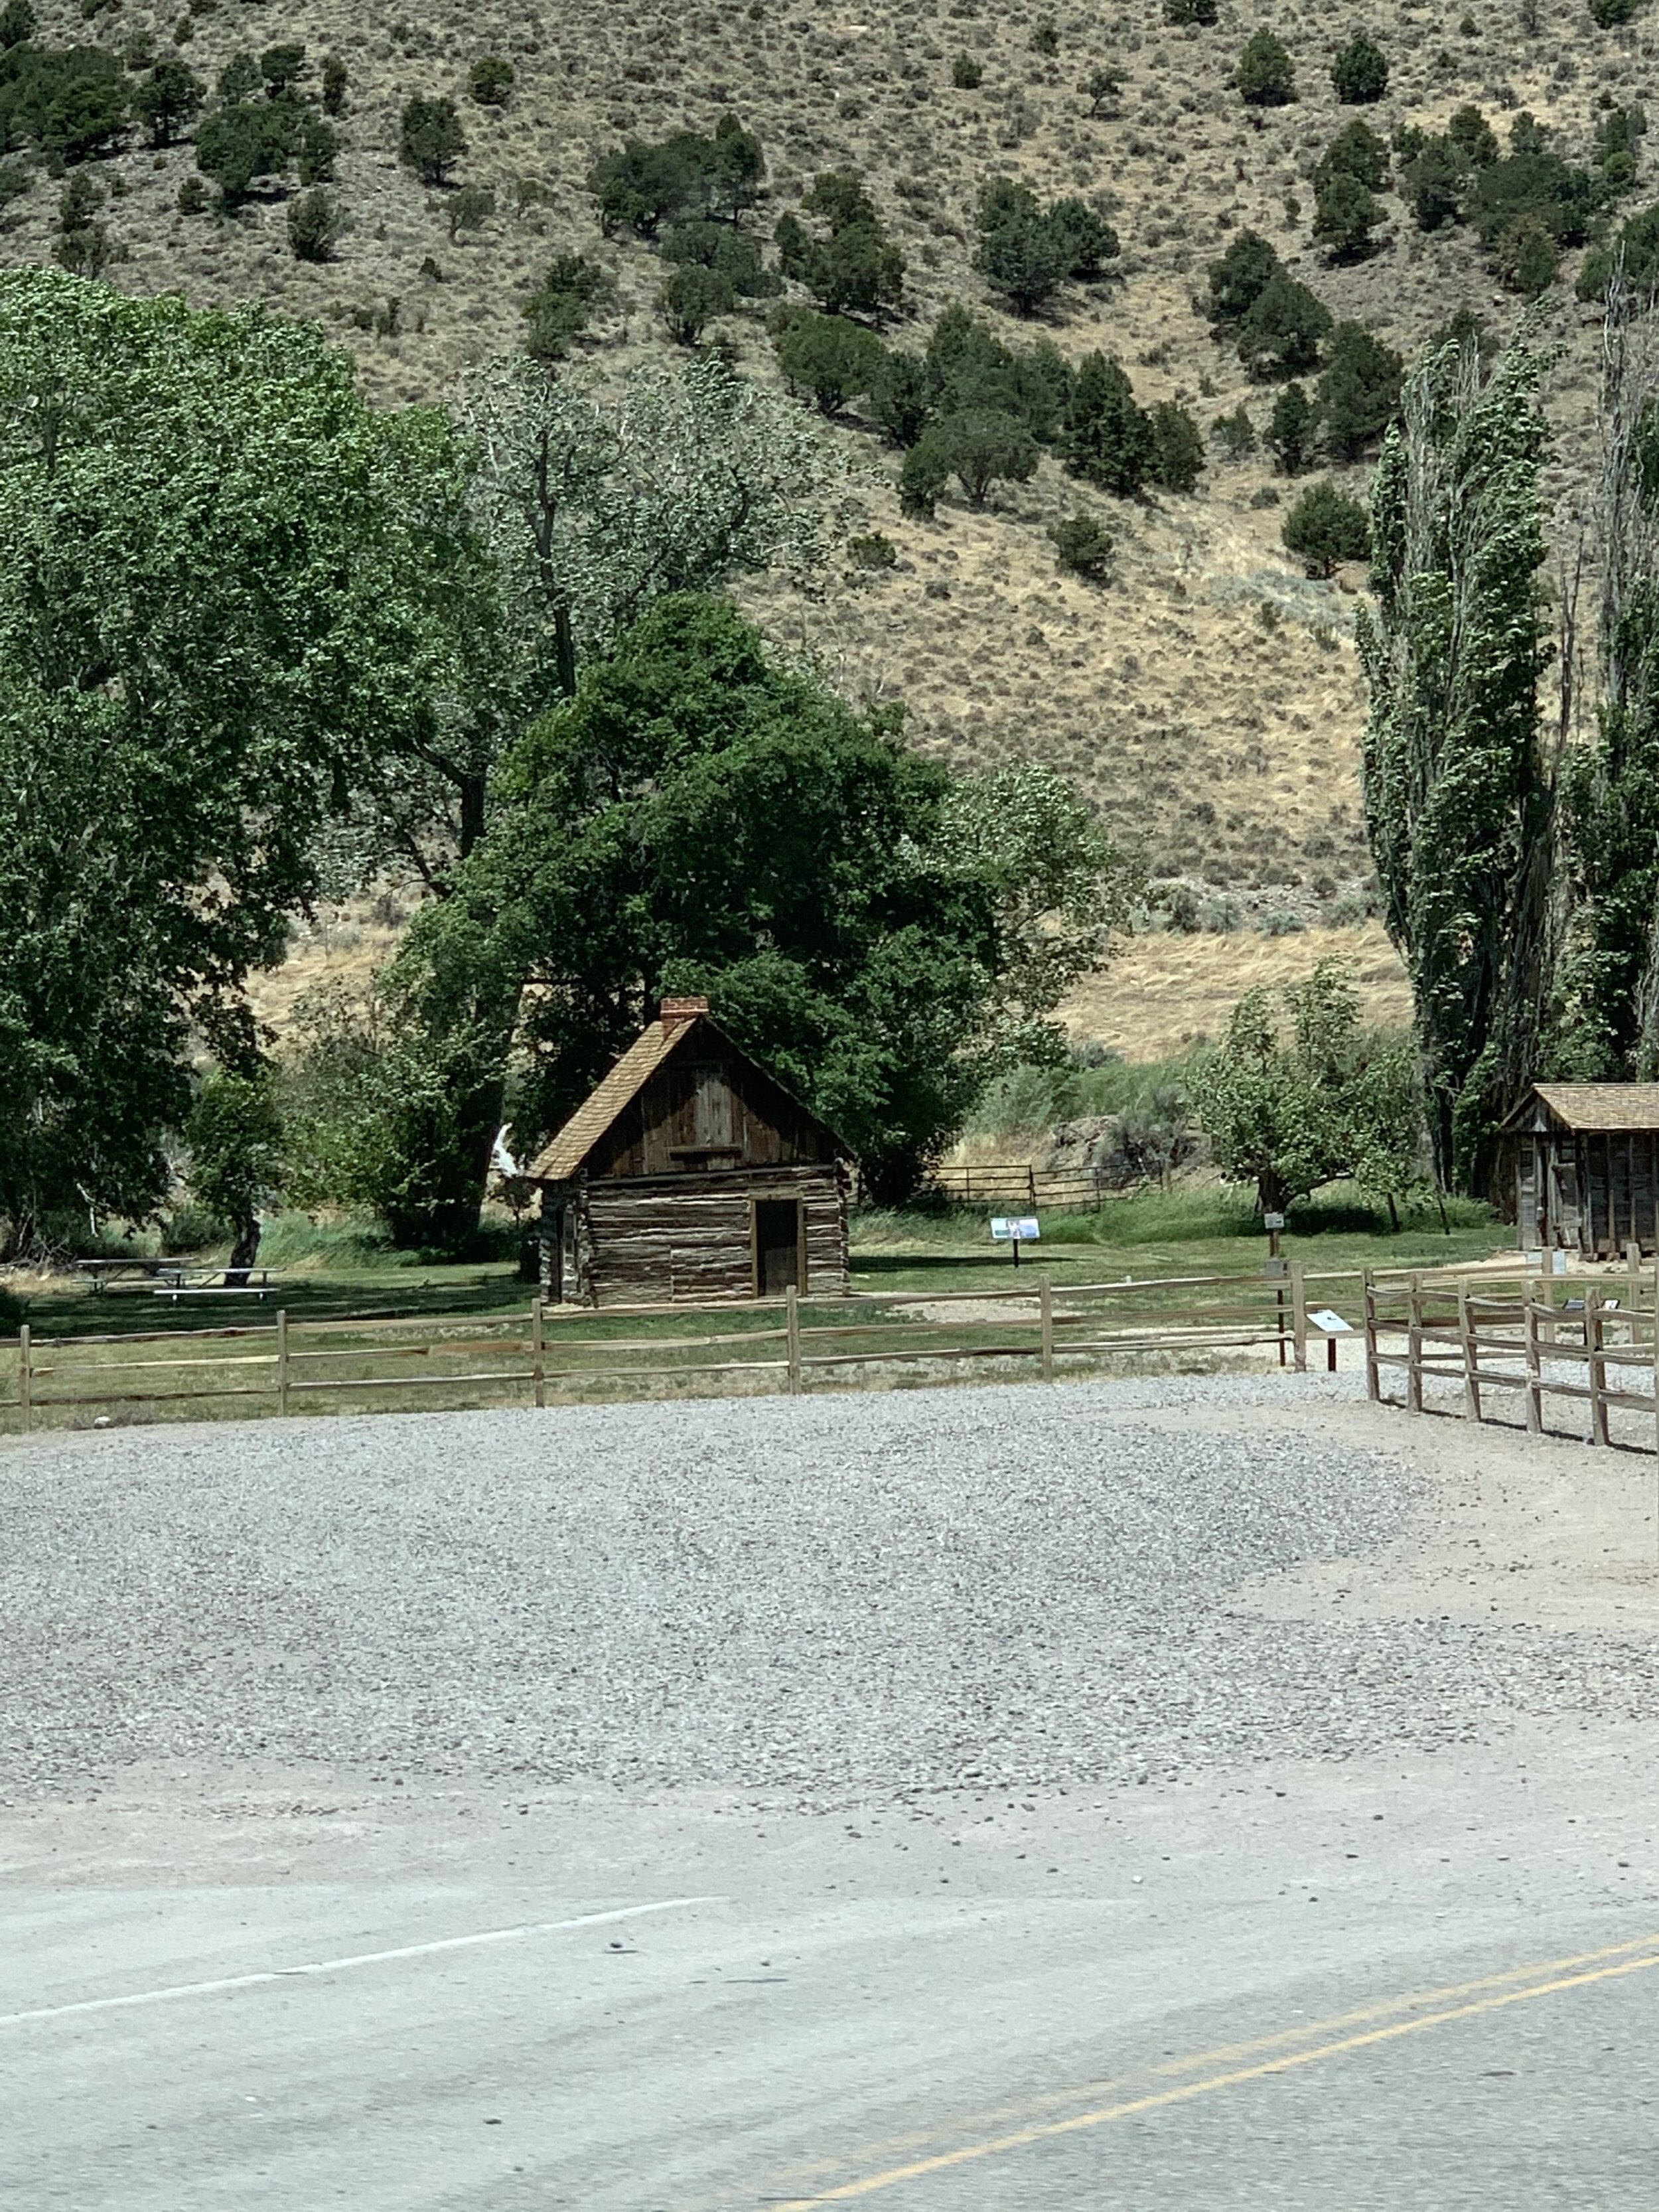  We’re not certain anyone cares, but this is where Butch Cassidy was born. We passed his birthplace in Beaver, UT en en route to Bryce Canyon National Park. Butch Cassidy was a train and bank robber, and the leader of a gang of criminal outlaws known